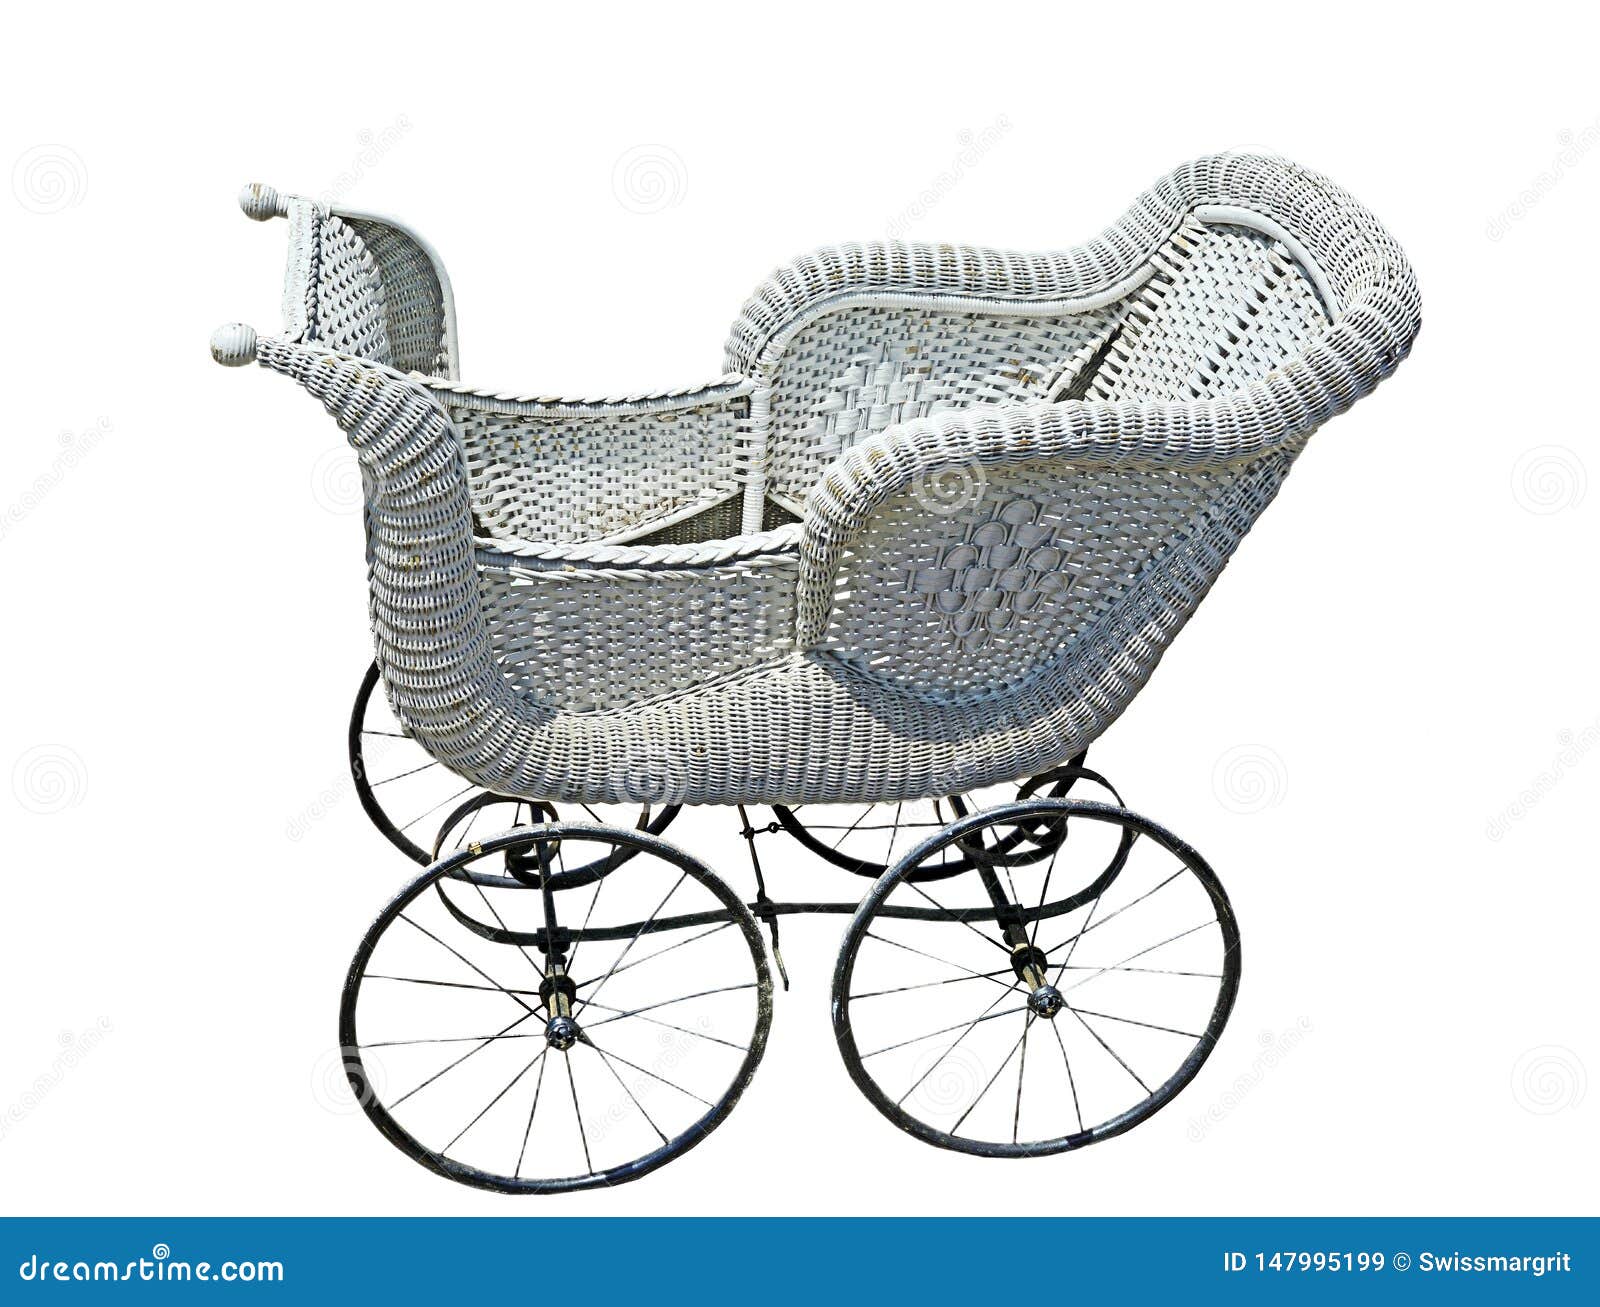 antique baby carriage for sale